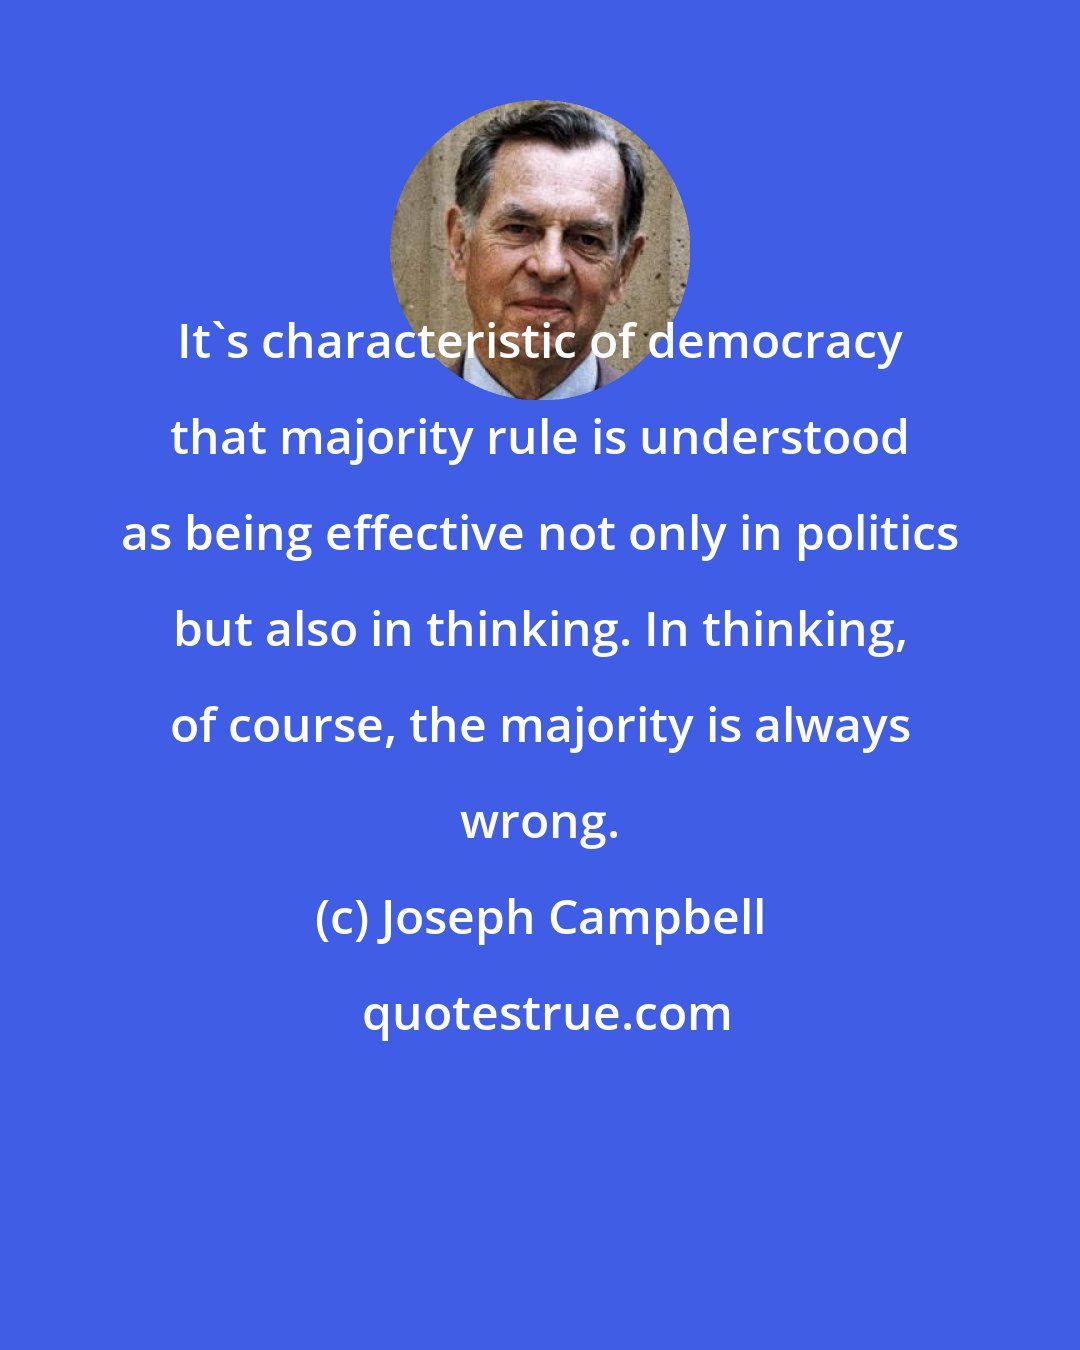 Joseph Campbell: It's characteristic of democracy that majority rule is understood as being effective not only in politics but also in thinking. In thinking, of course, the majority is always wrong.